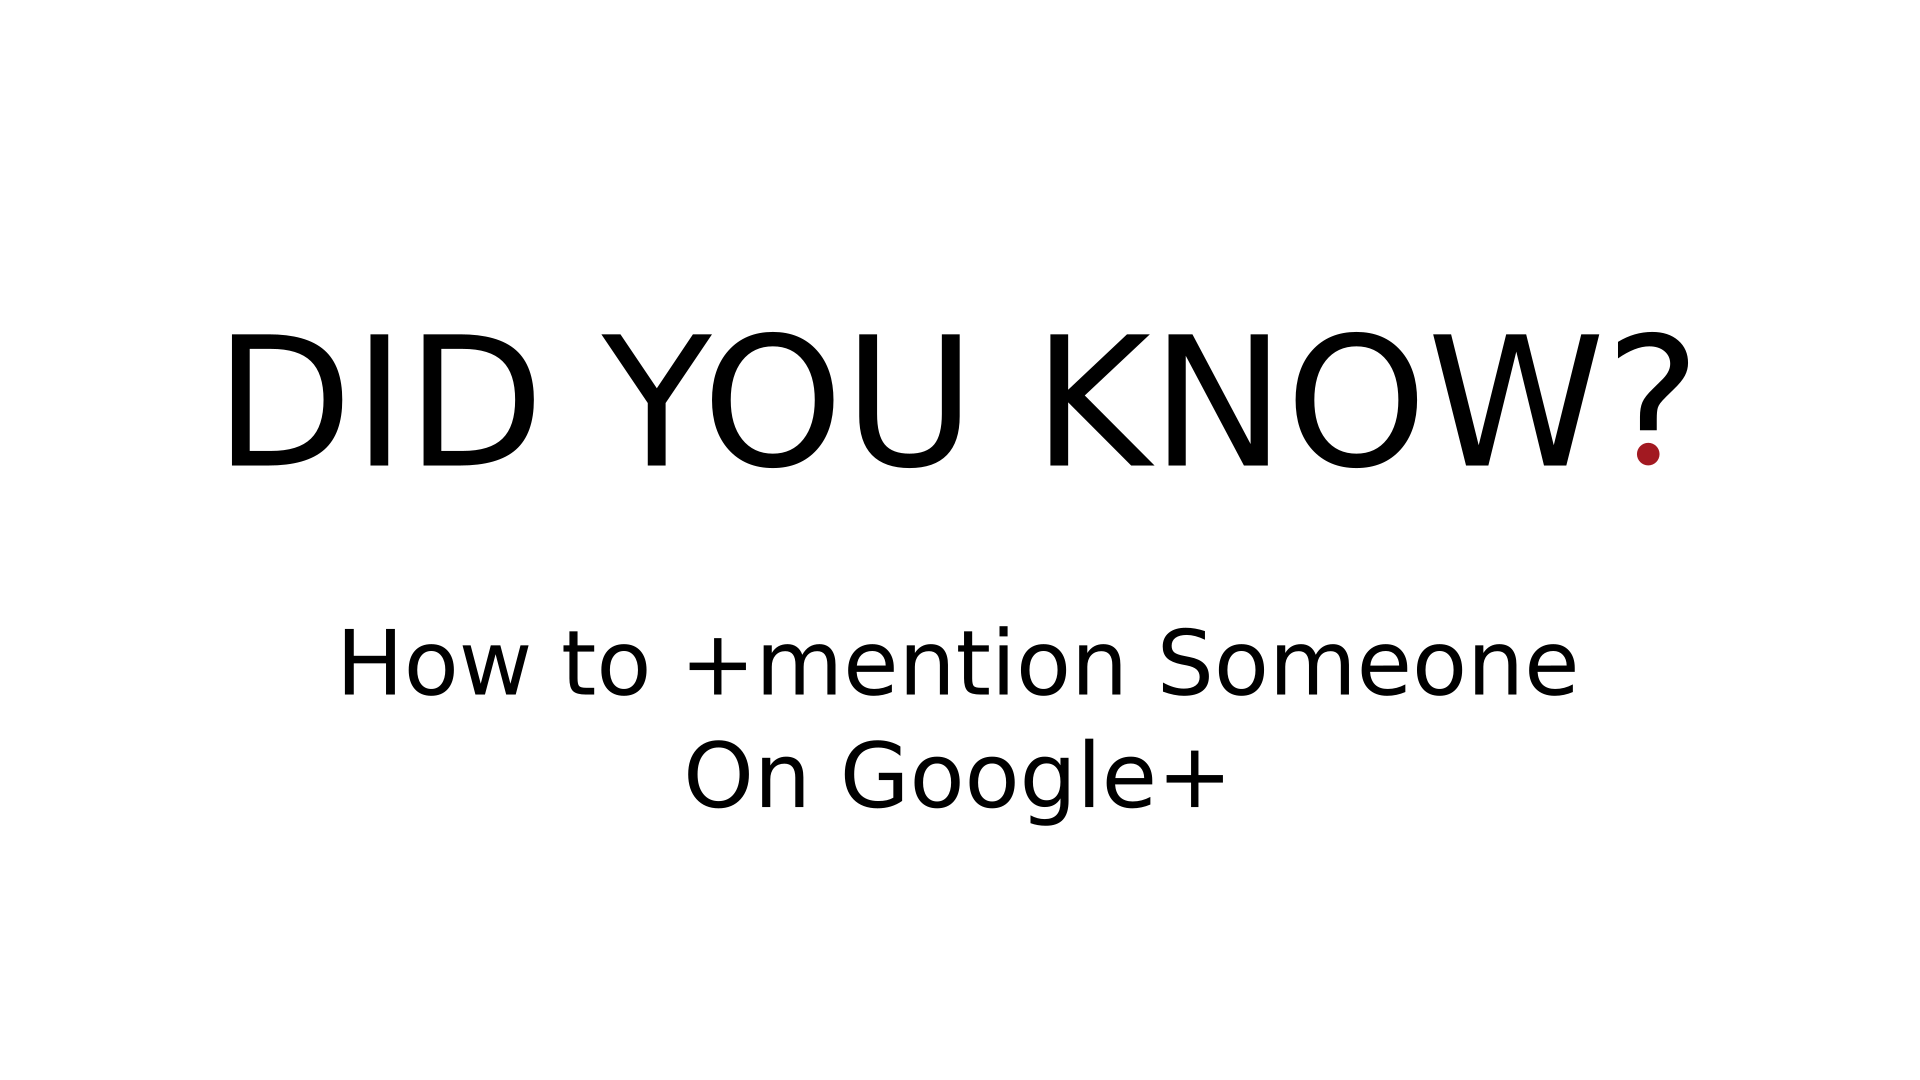 DID YOU KNOW? - How to +mention Someone On Google+